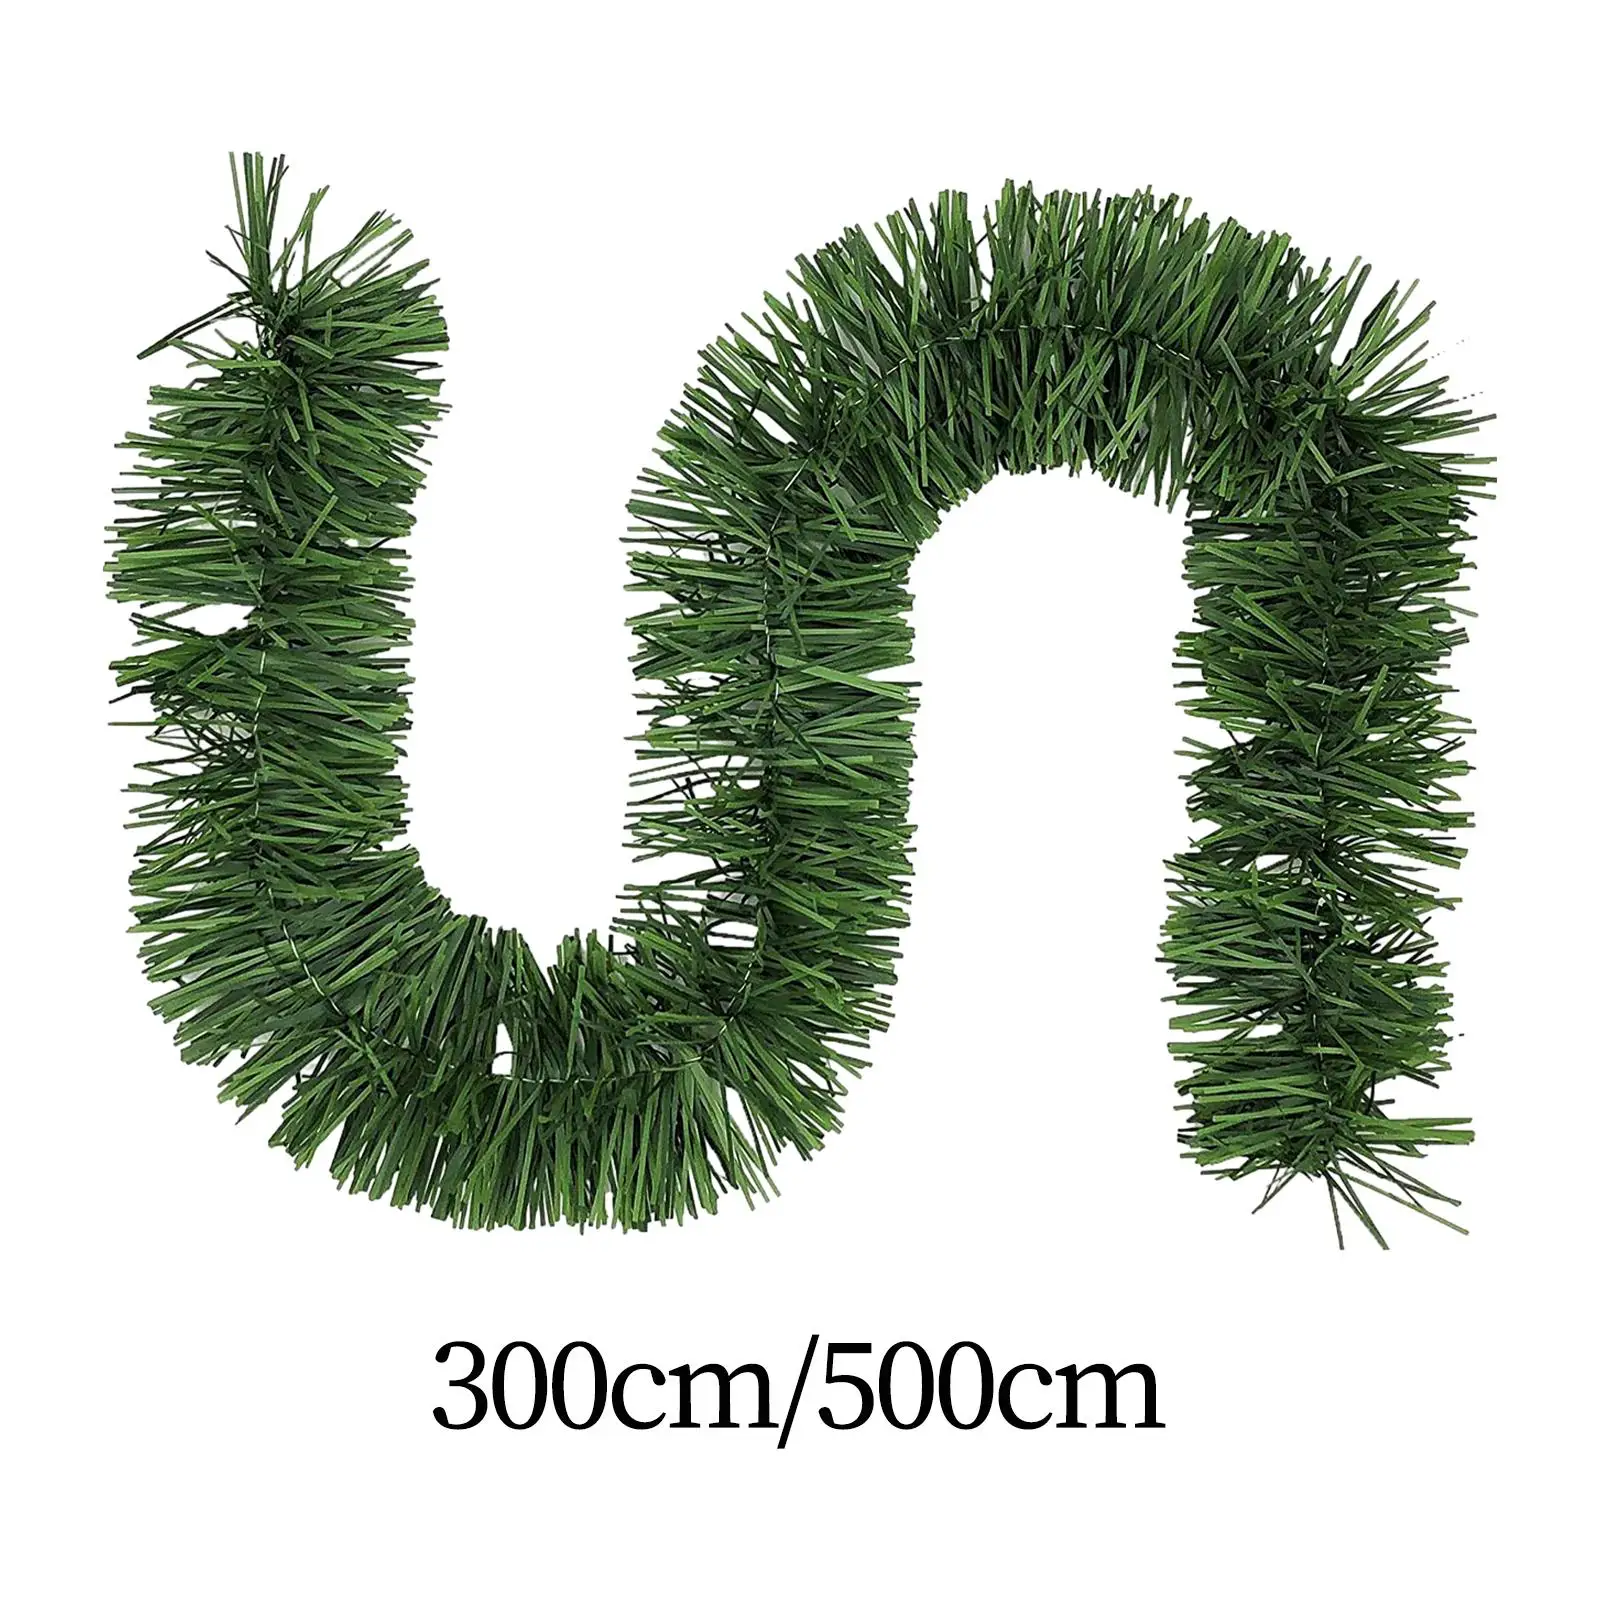 Artificial Christmas Garland Christmas Decorations Hanging Holiday Garland for Railing Table Indoor Outdoor Winter Outside